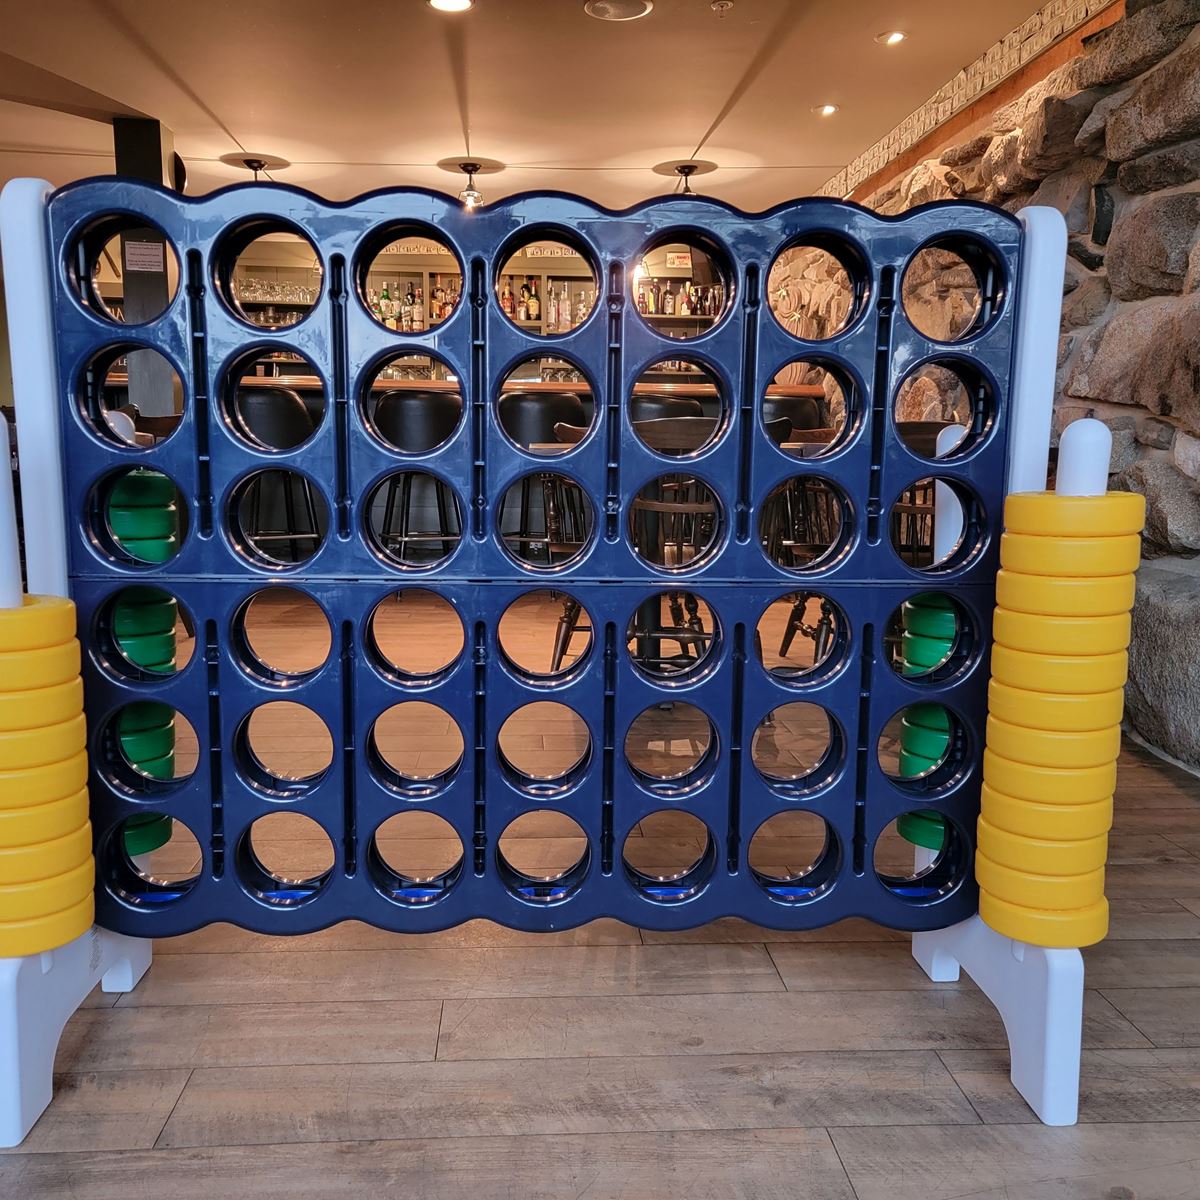 Connect Four at Quarry Tavern